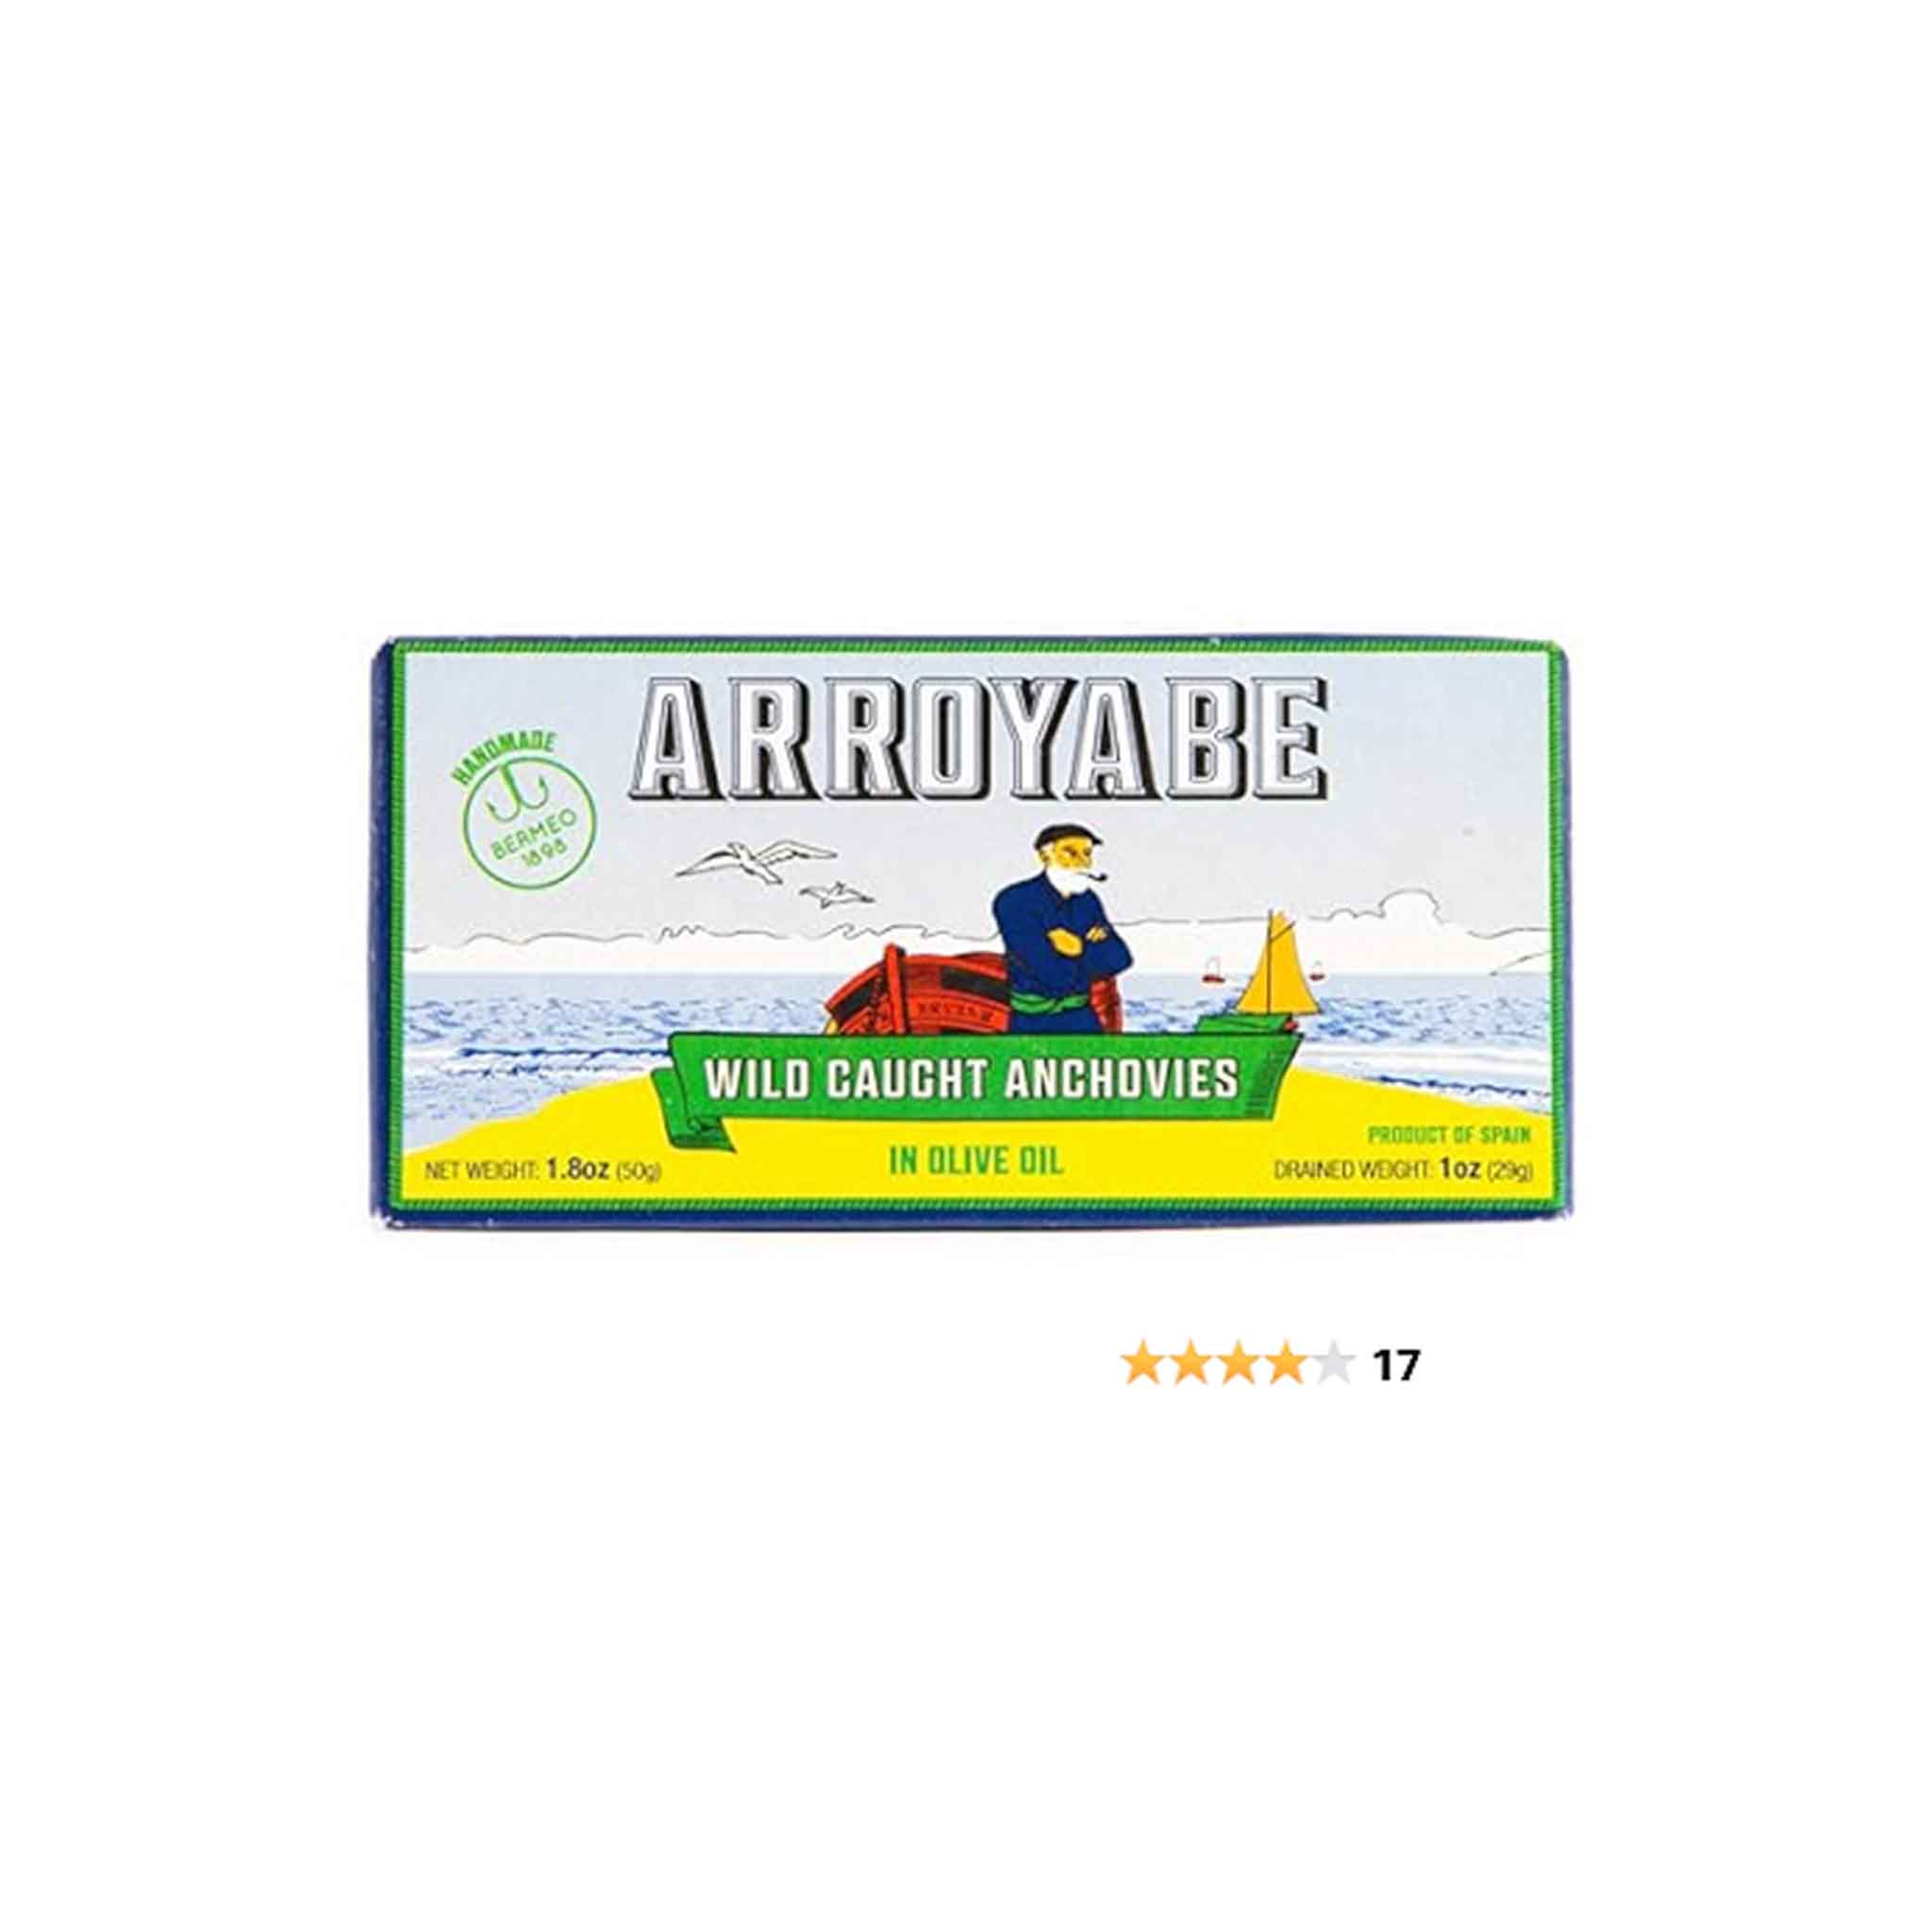 ARROYABE ANCHOVY FILLETS 49g